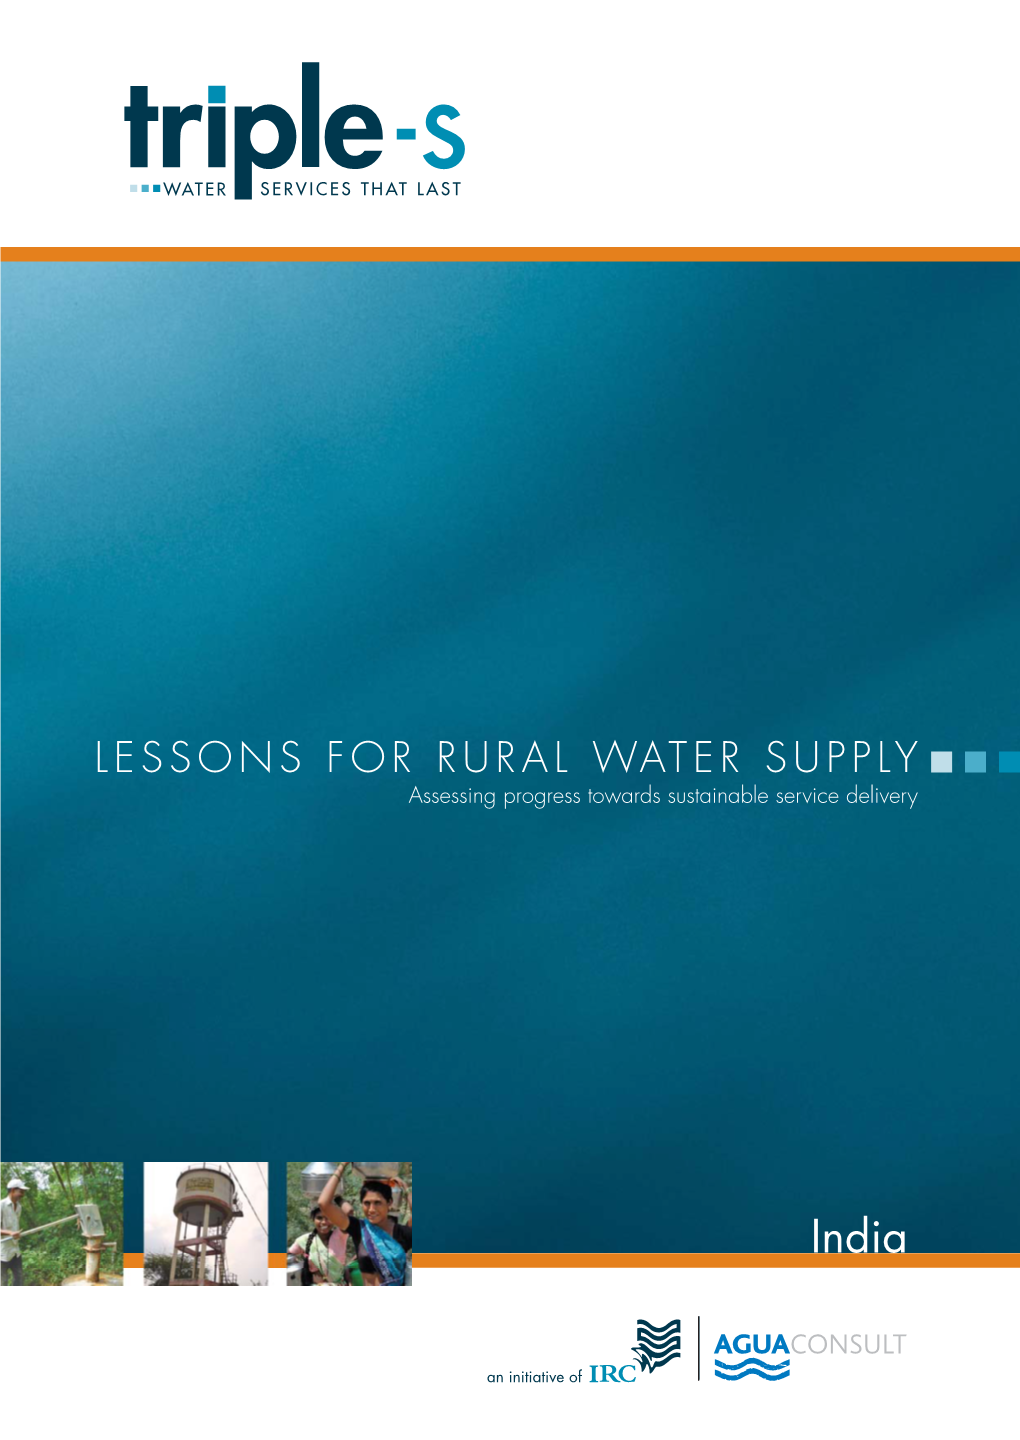 Lessons for Rural Water Supply in India